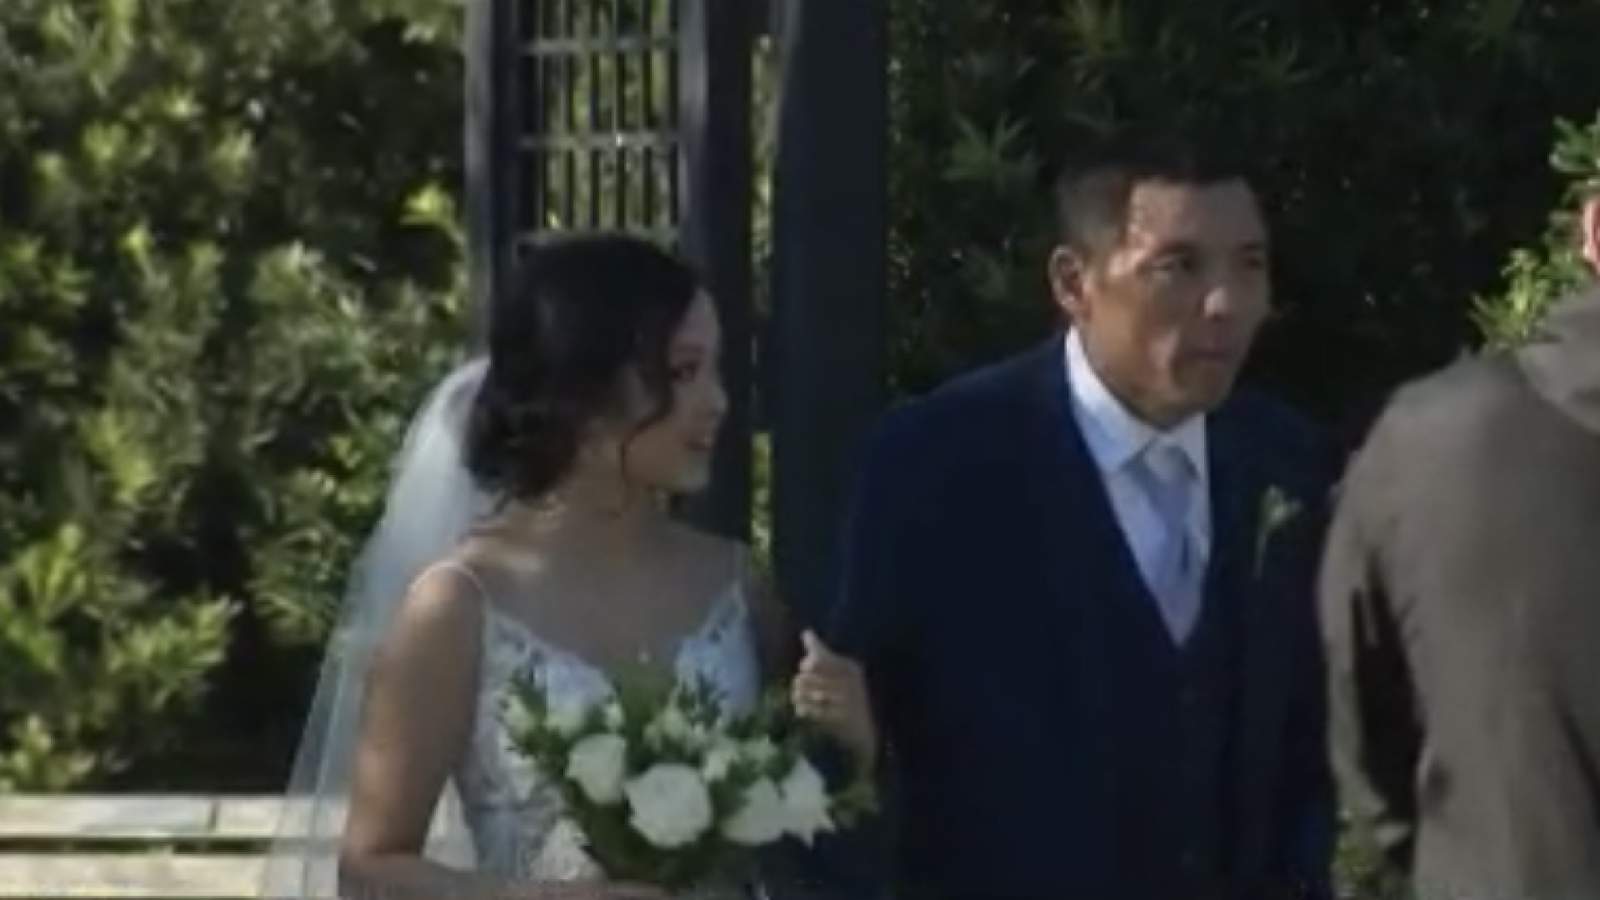 Father walks daughter down the aisle after recovering from freak accident